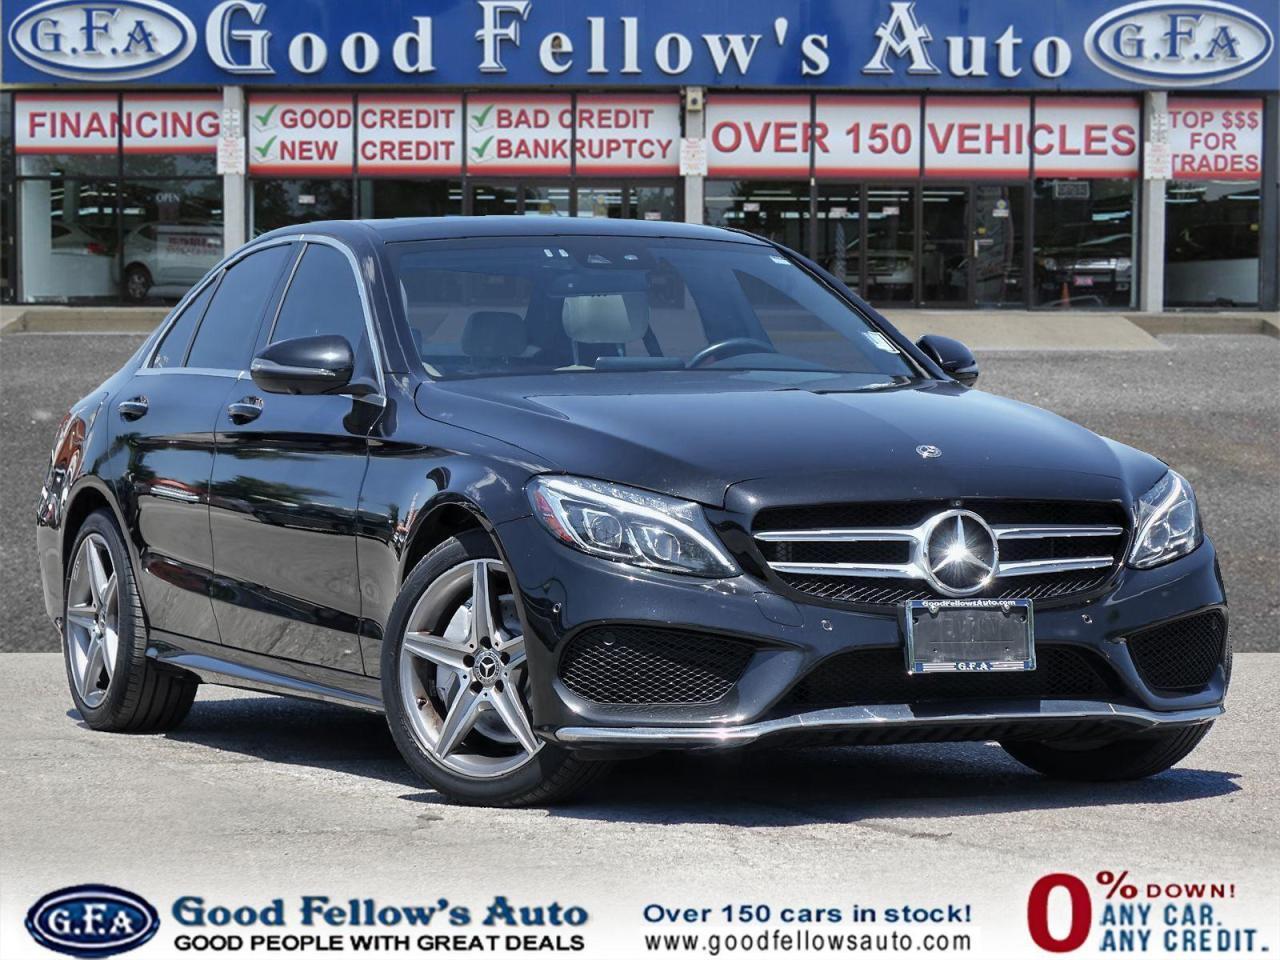 2018 Mercedes-Benz C-Class 4MATIC, LEATHER SEATS, PANORAMIC ROOF, NAVIGATION,